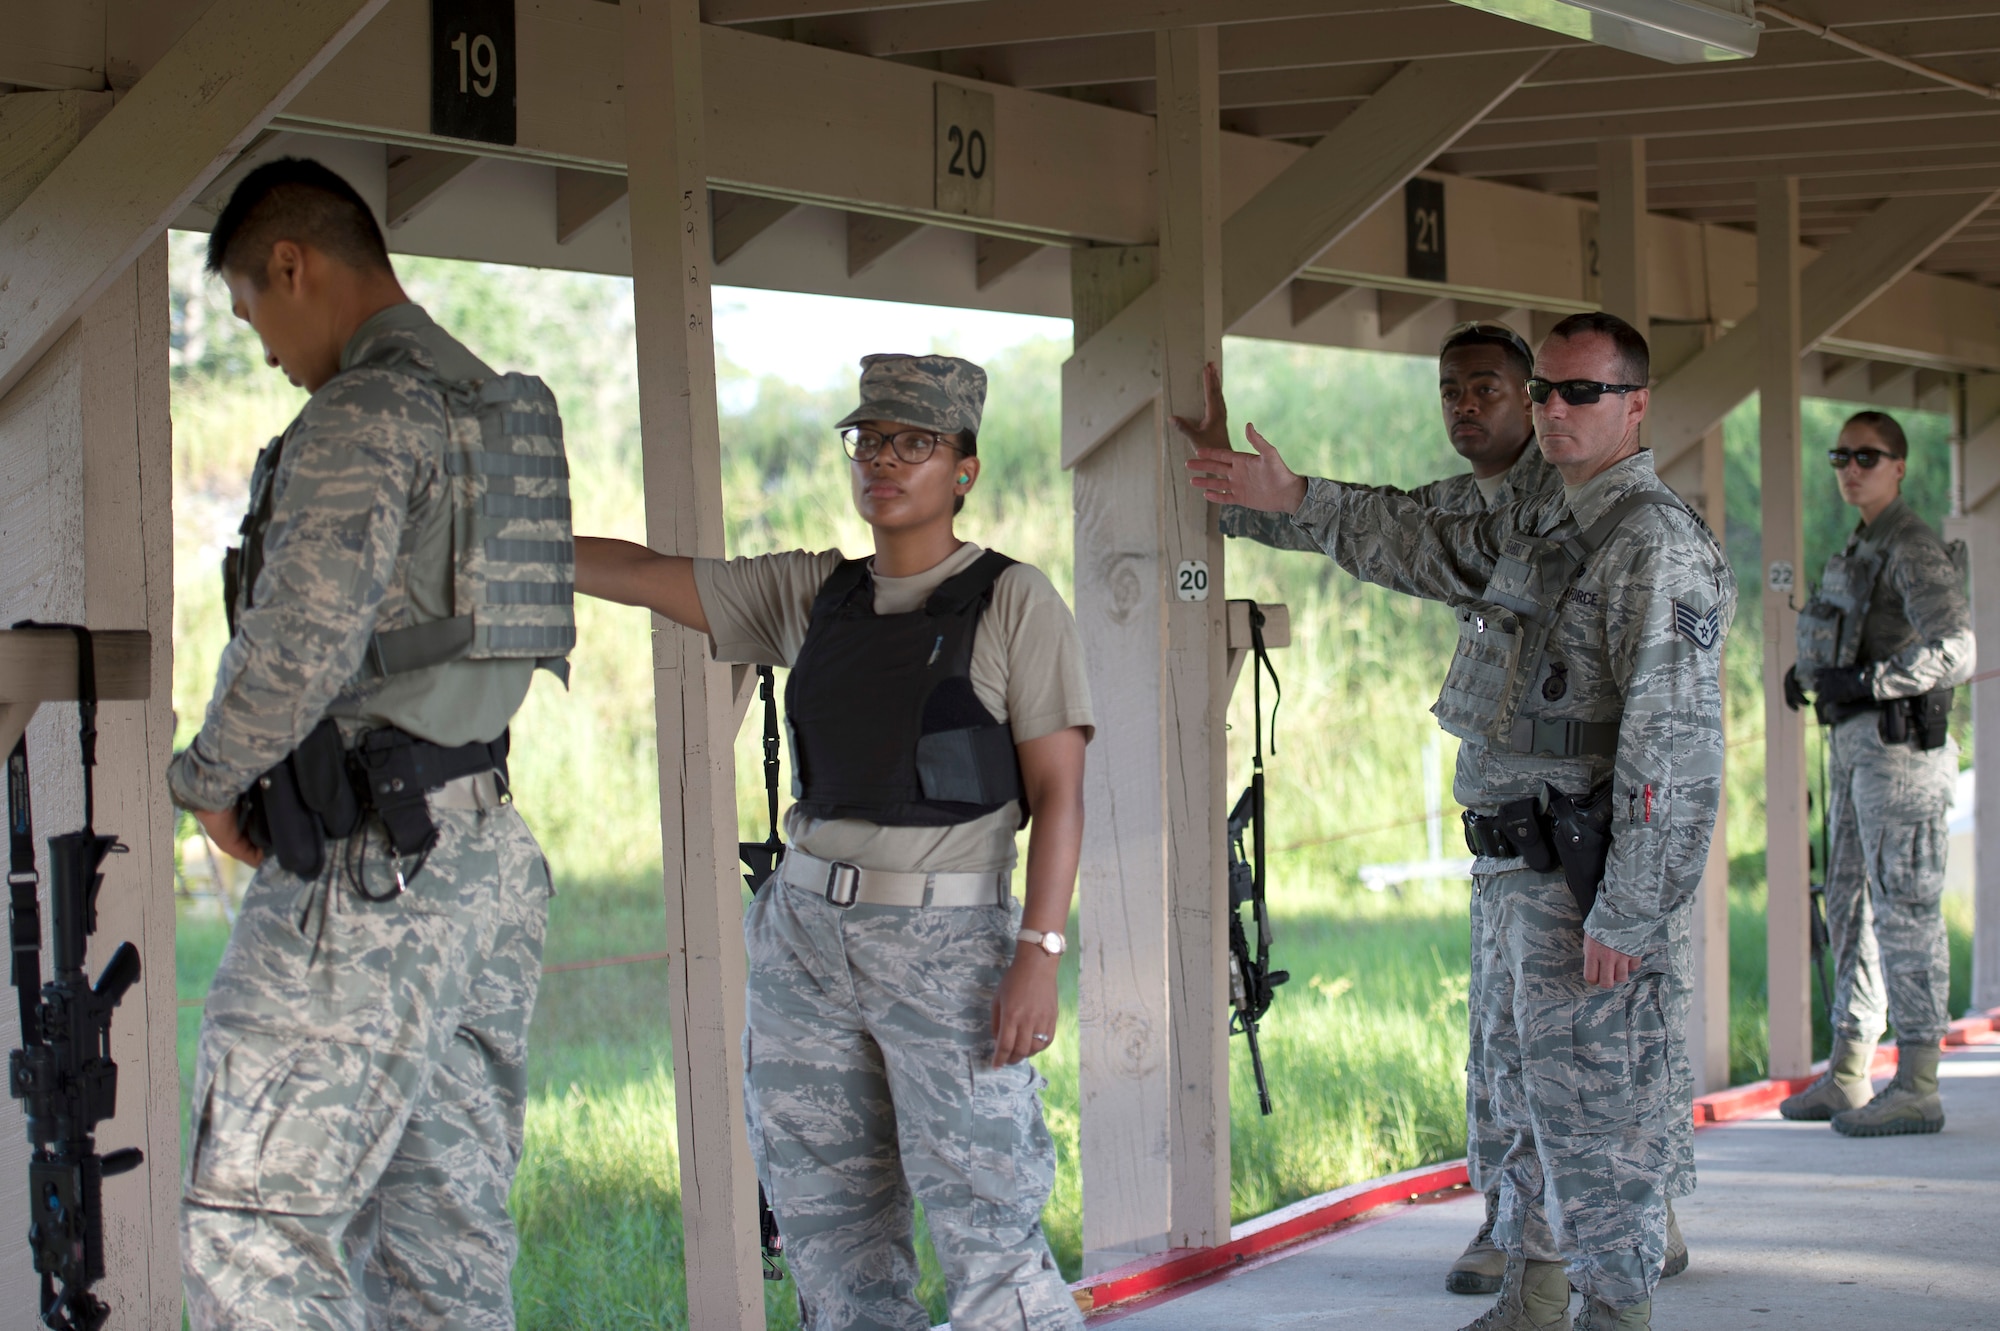 U.S. Air Force security forces members assigned to the 6th Security Forces Squadron at MacDill Air Force Base, Fla., signal to the lead instructor that the line is safe and clear during a proficiency fire training, Aug. 16, 2017.